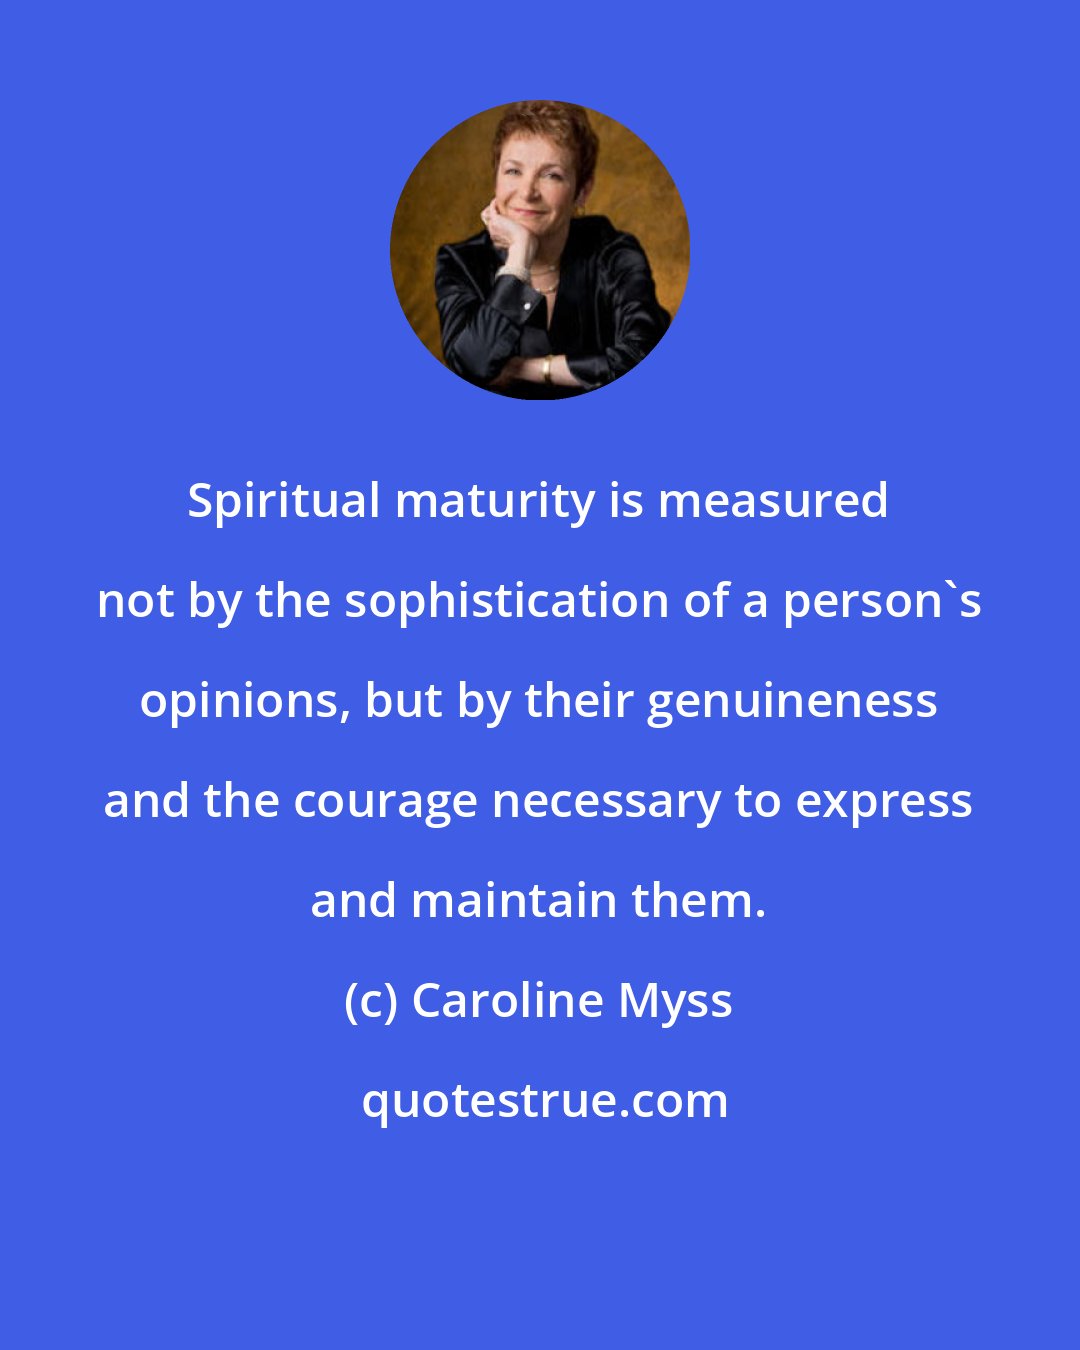 Caroline Myss: Spiritual maturity is measured not by the sophistication of a person's opinions, but by their genuineness and the courage necessary to express and maintain them.